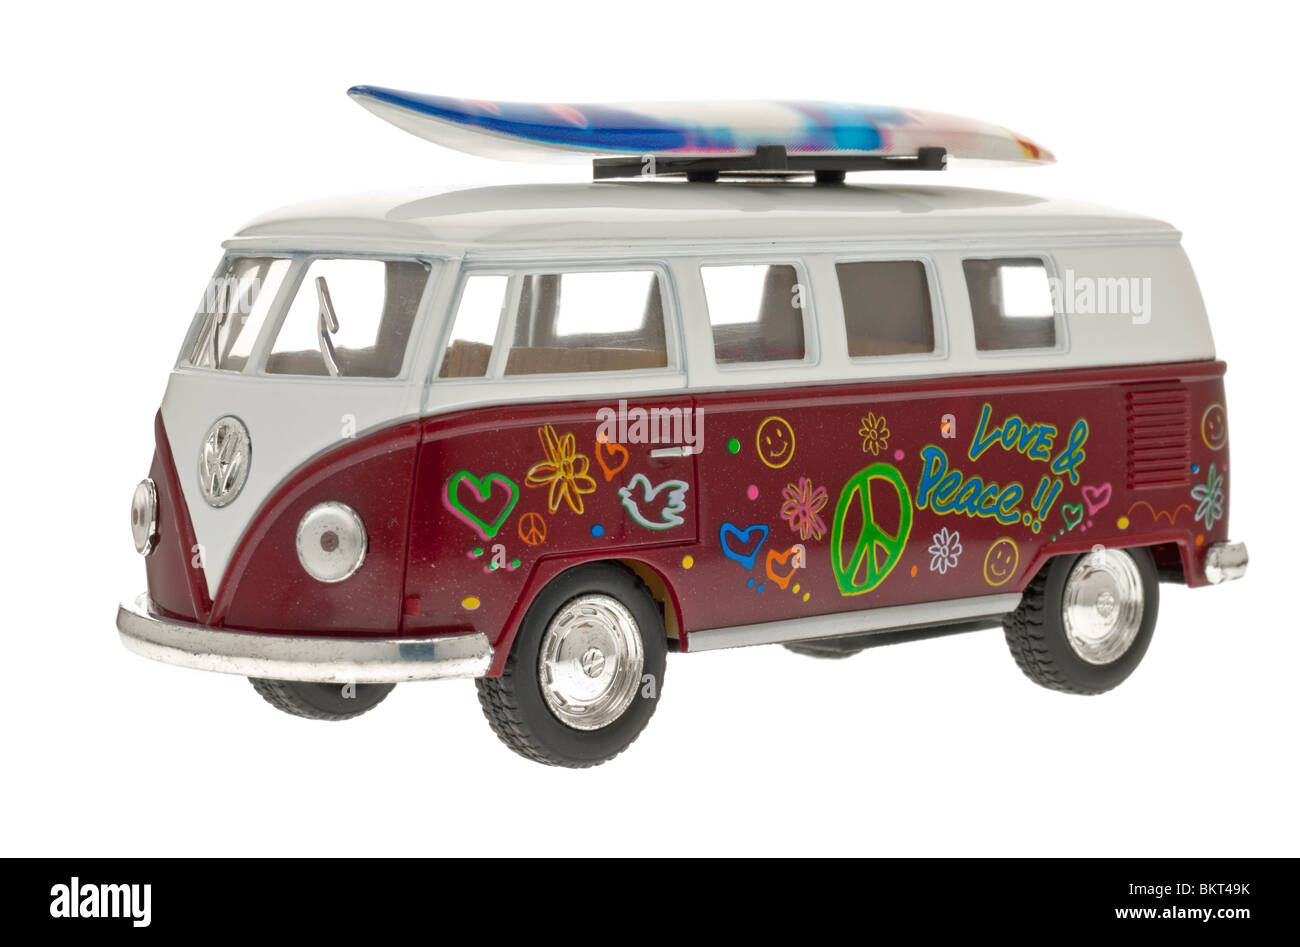 Vw camper van Cut Out Stock Images & Pictures - Alamy